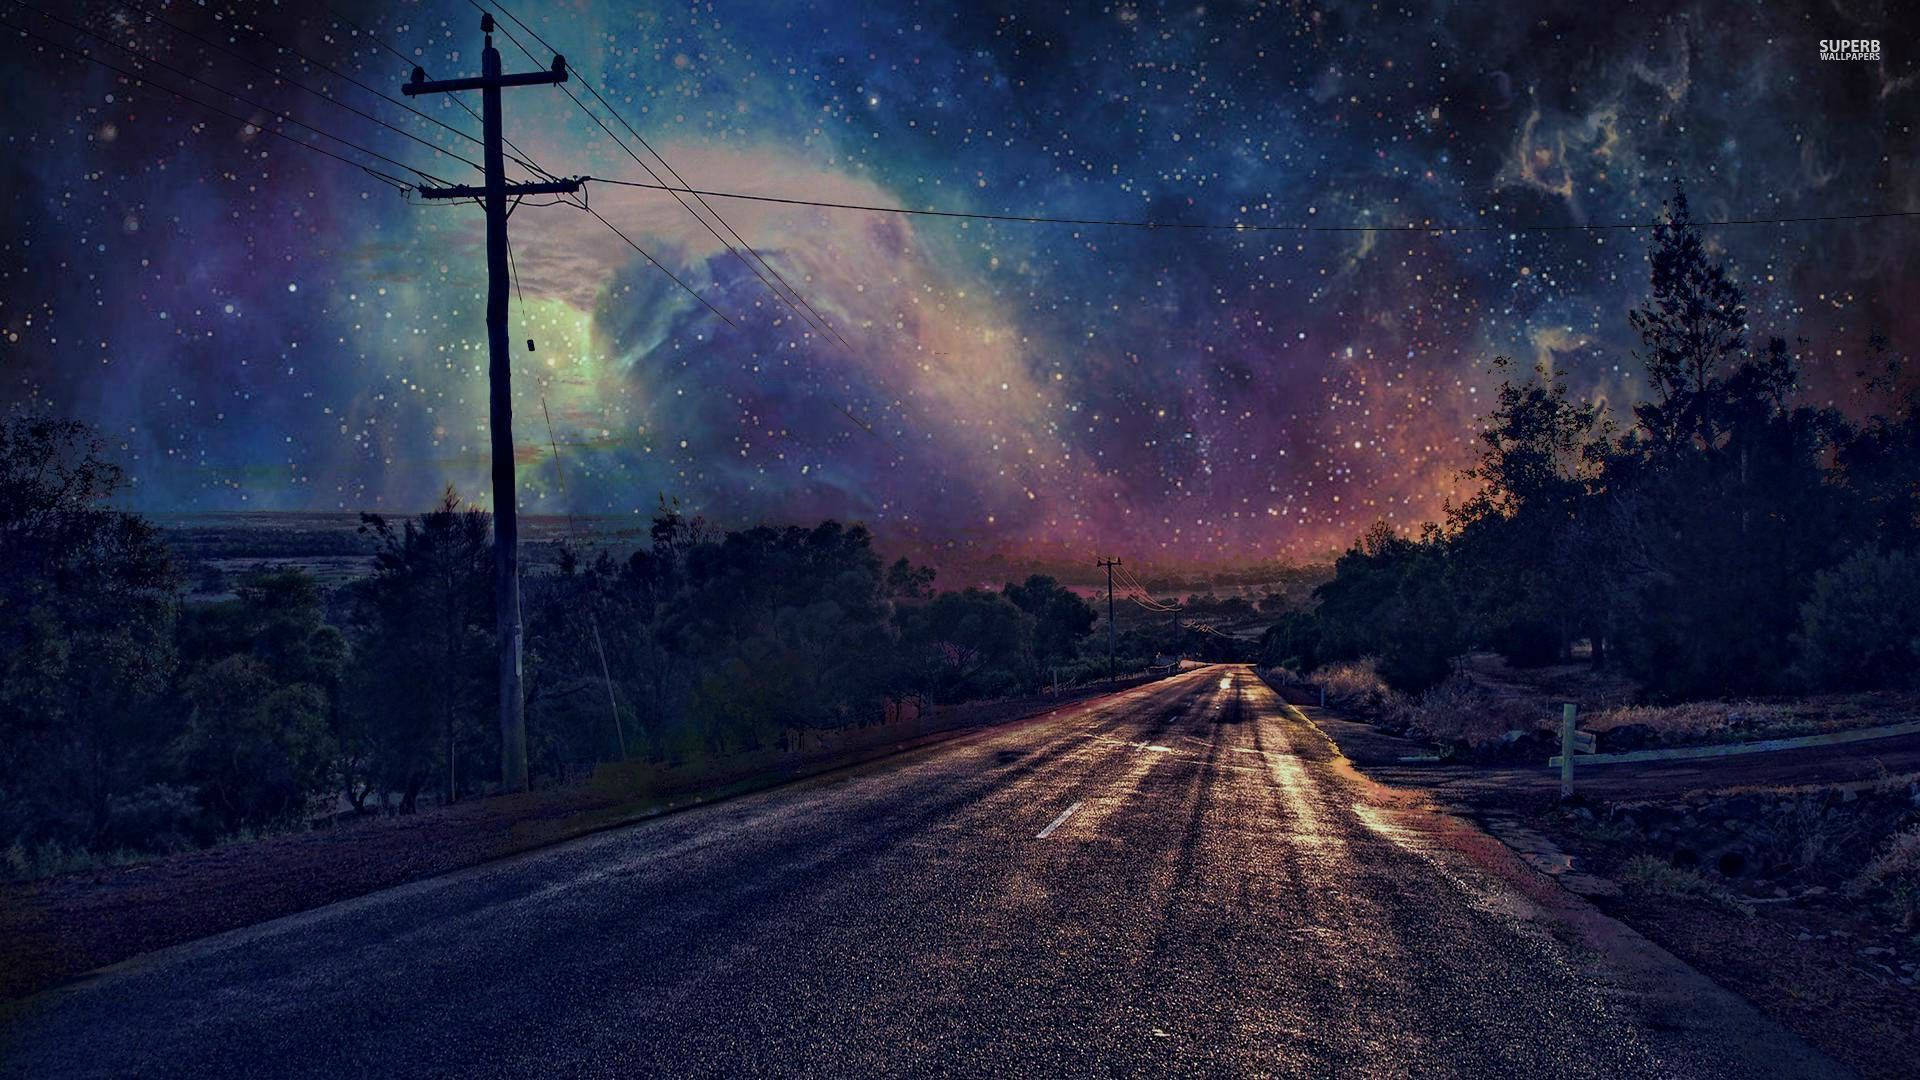 "Find yourself in the wonders of a psychedelic night sky." Wallpaper